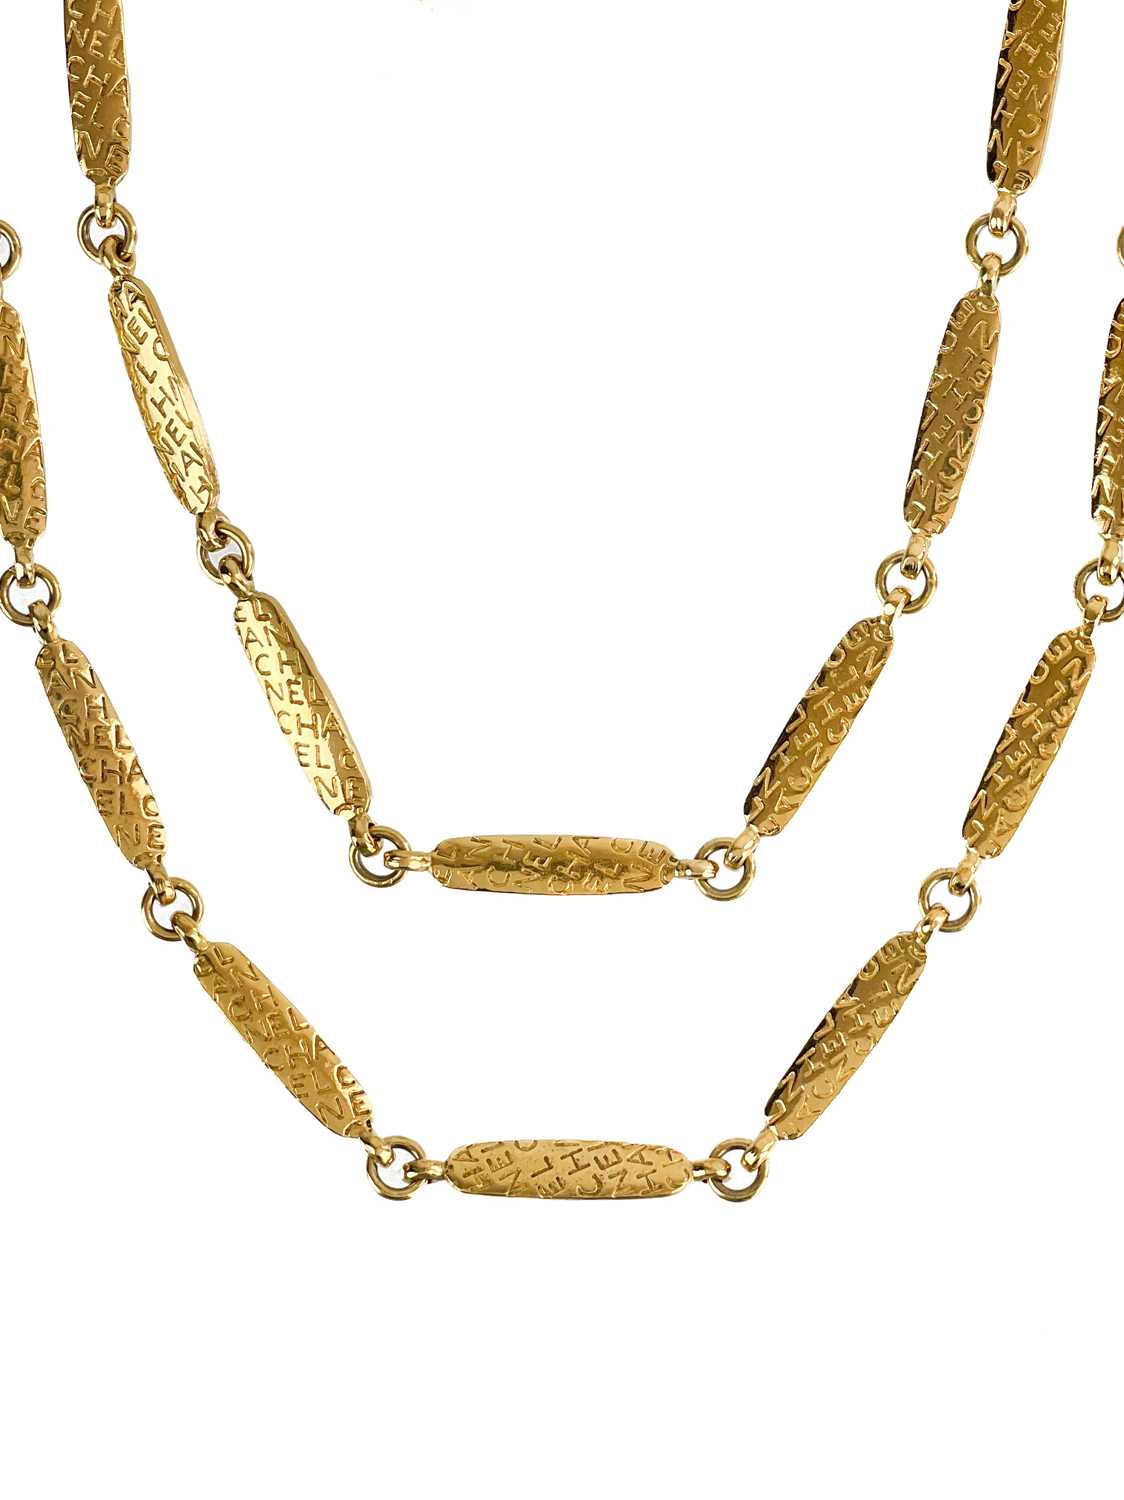 A Chanel 24ct gold-plated bar link extremely long necklace, circa 1990/91.